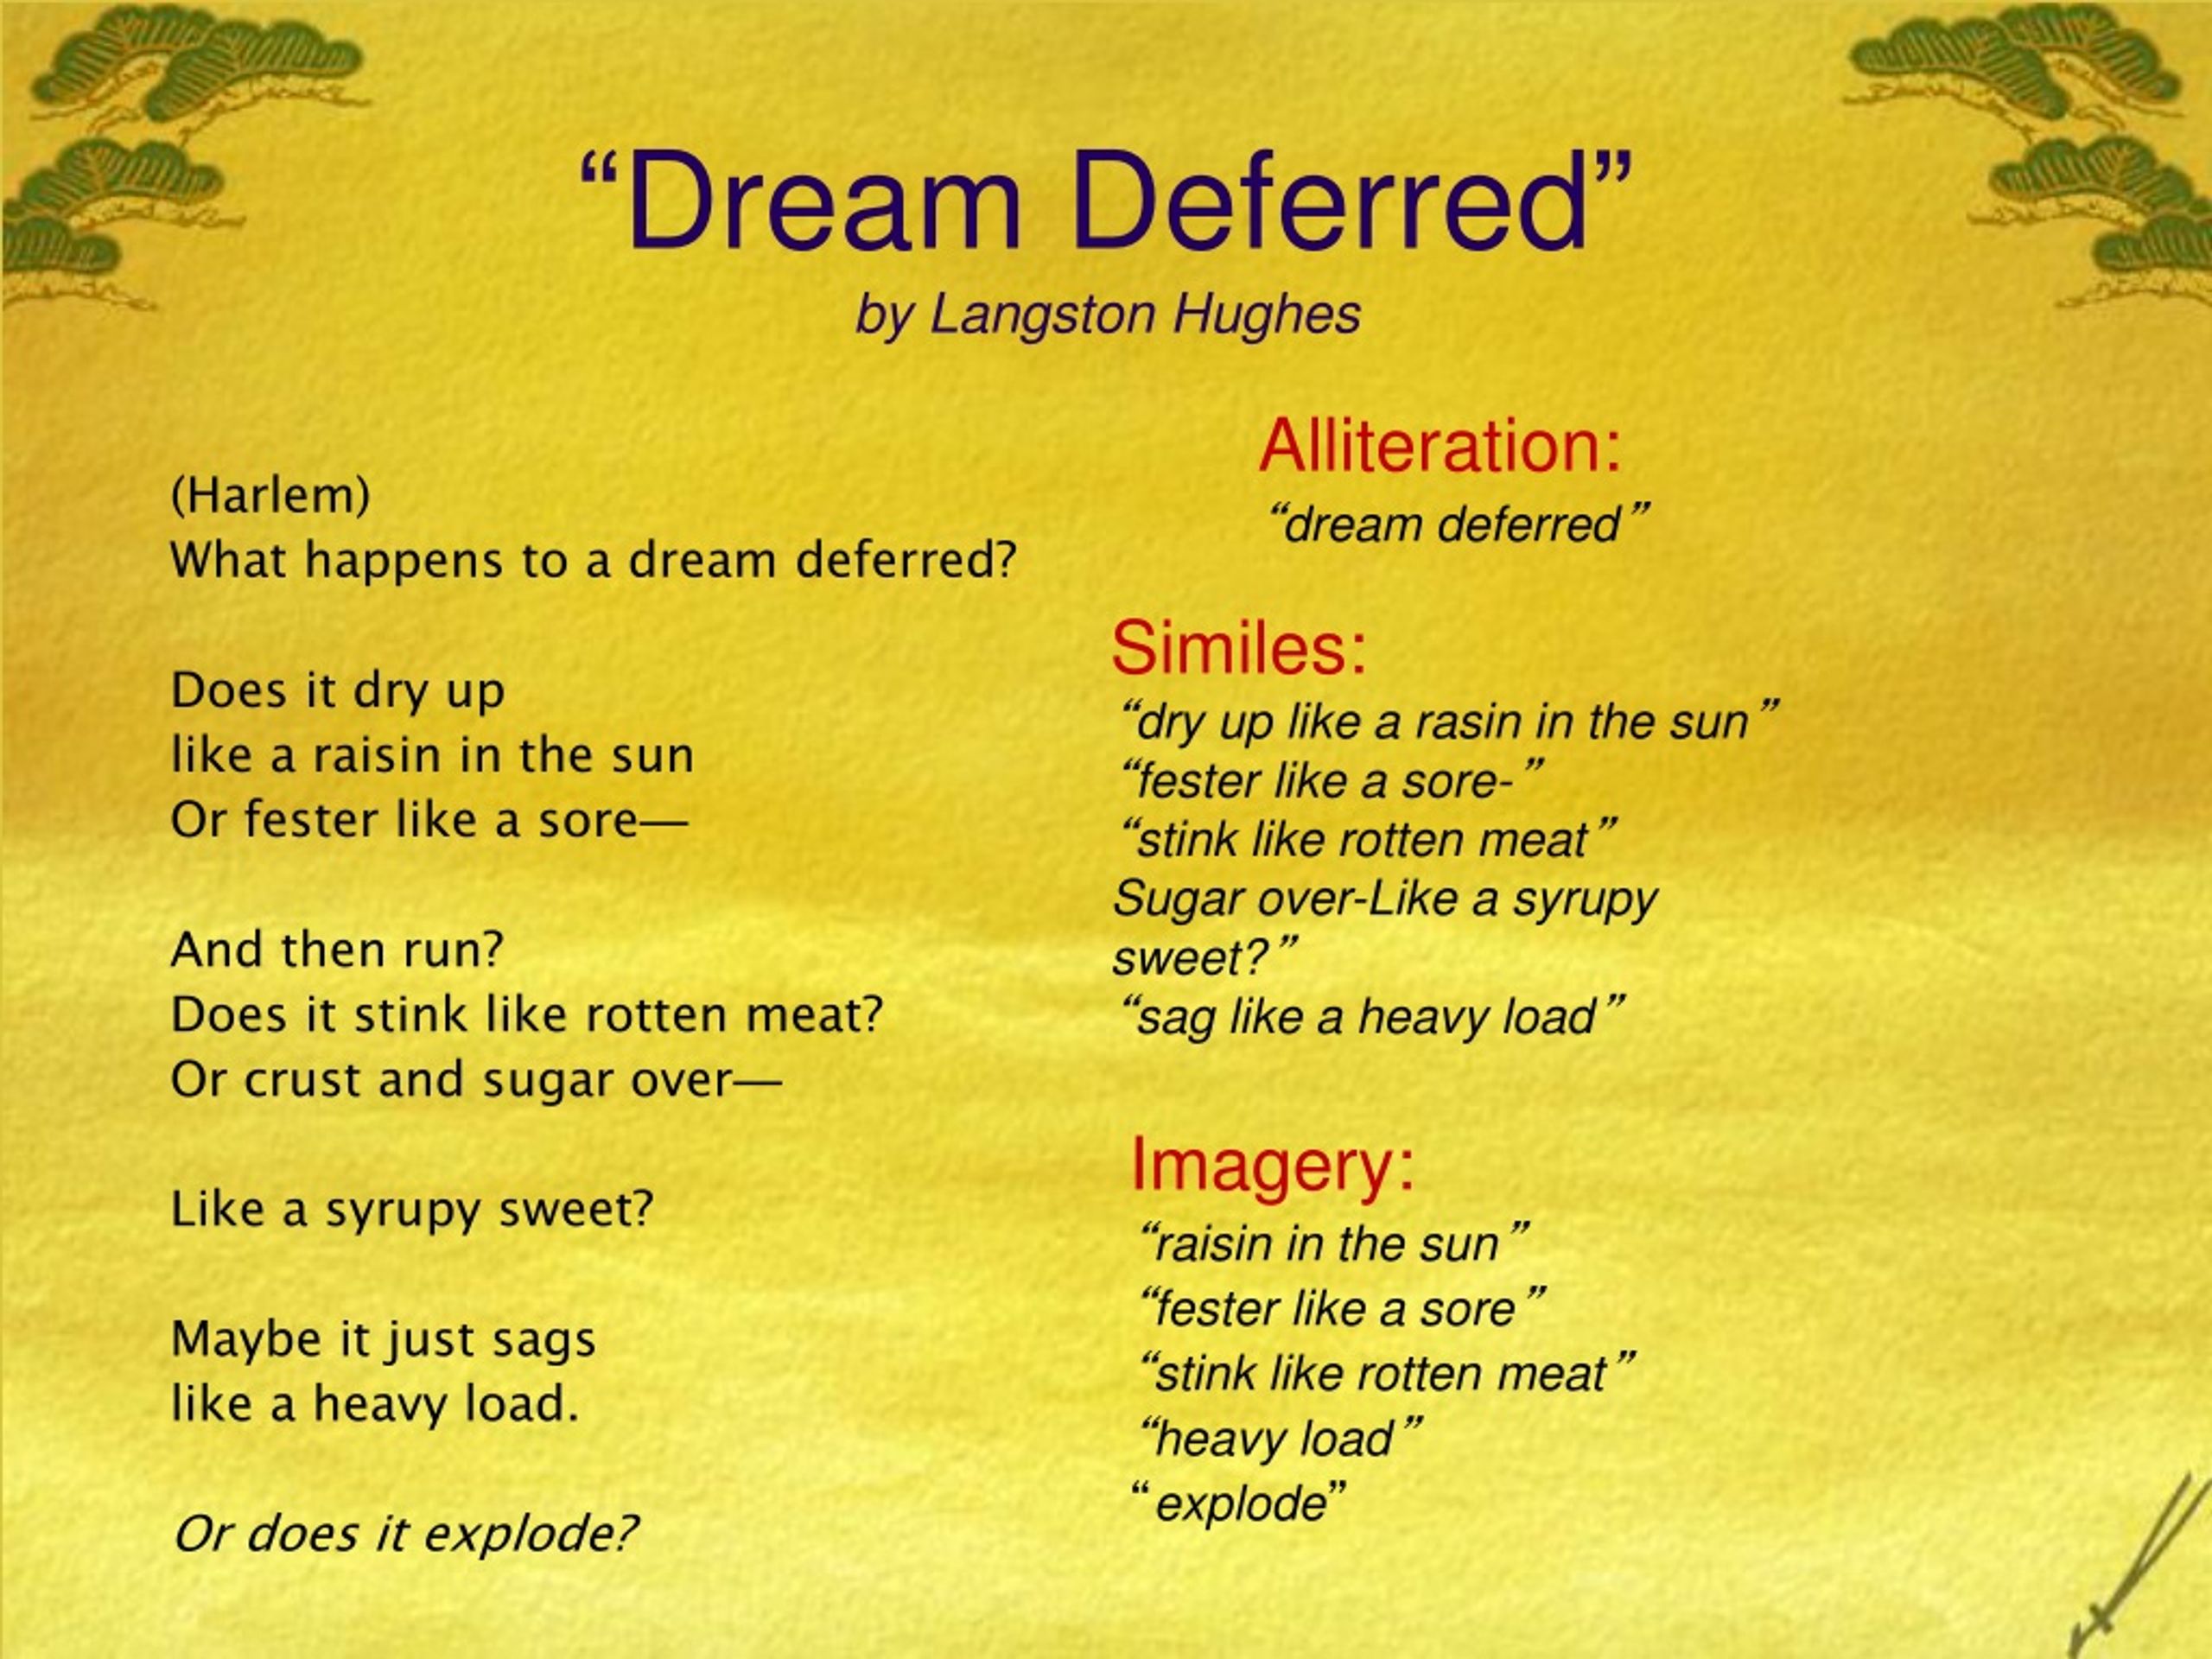 what does a dream deferred mean